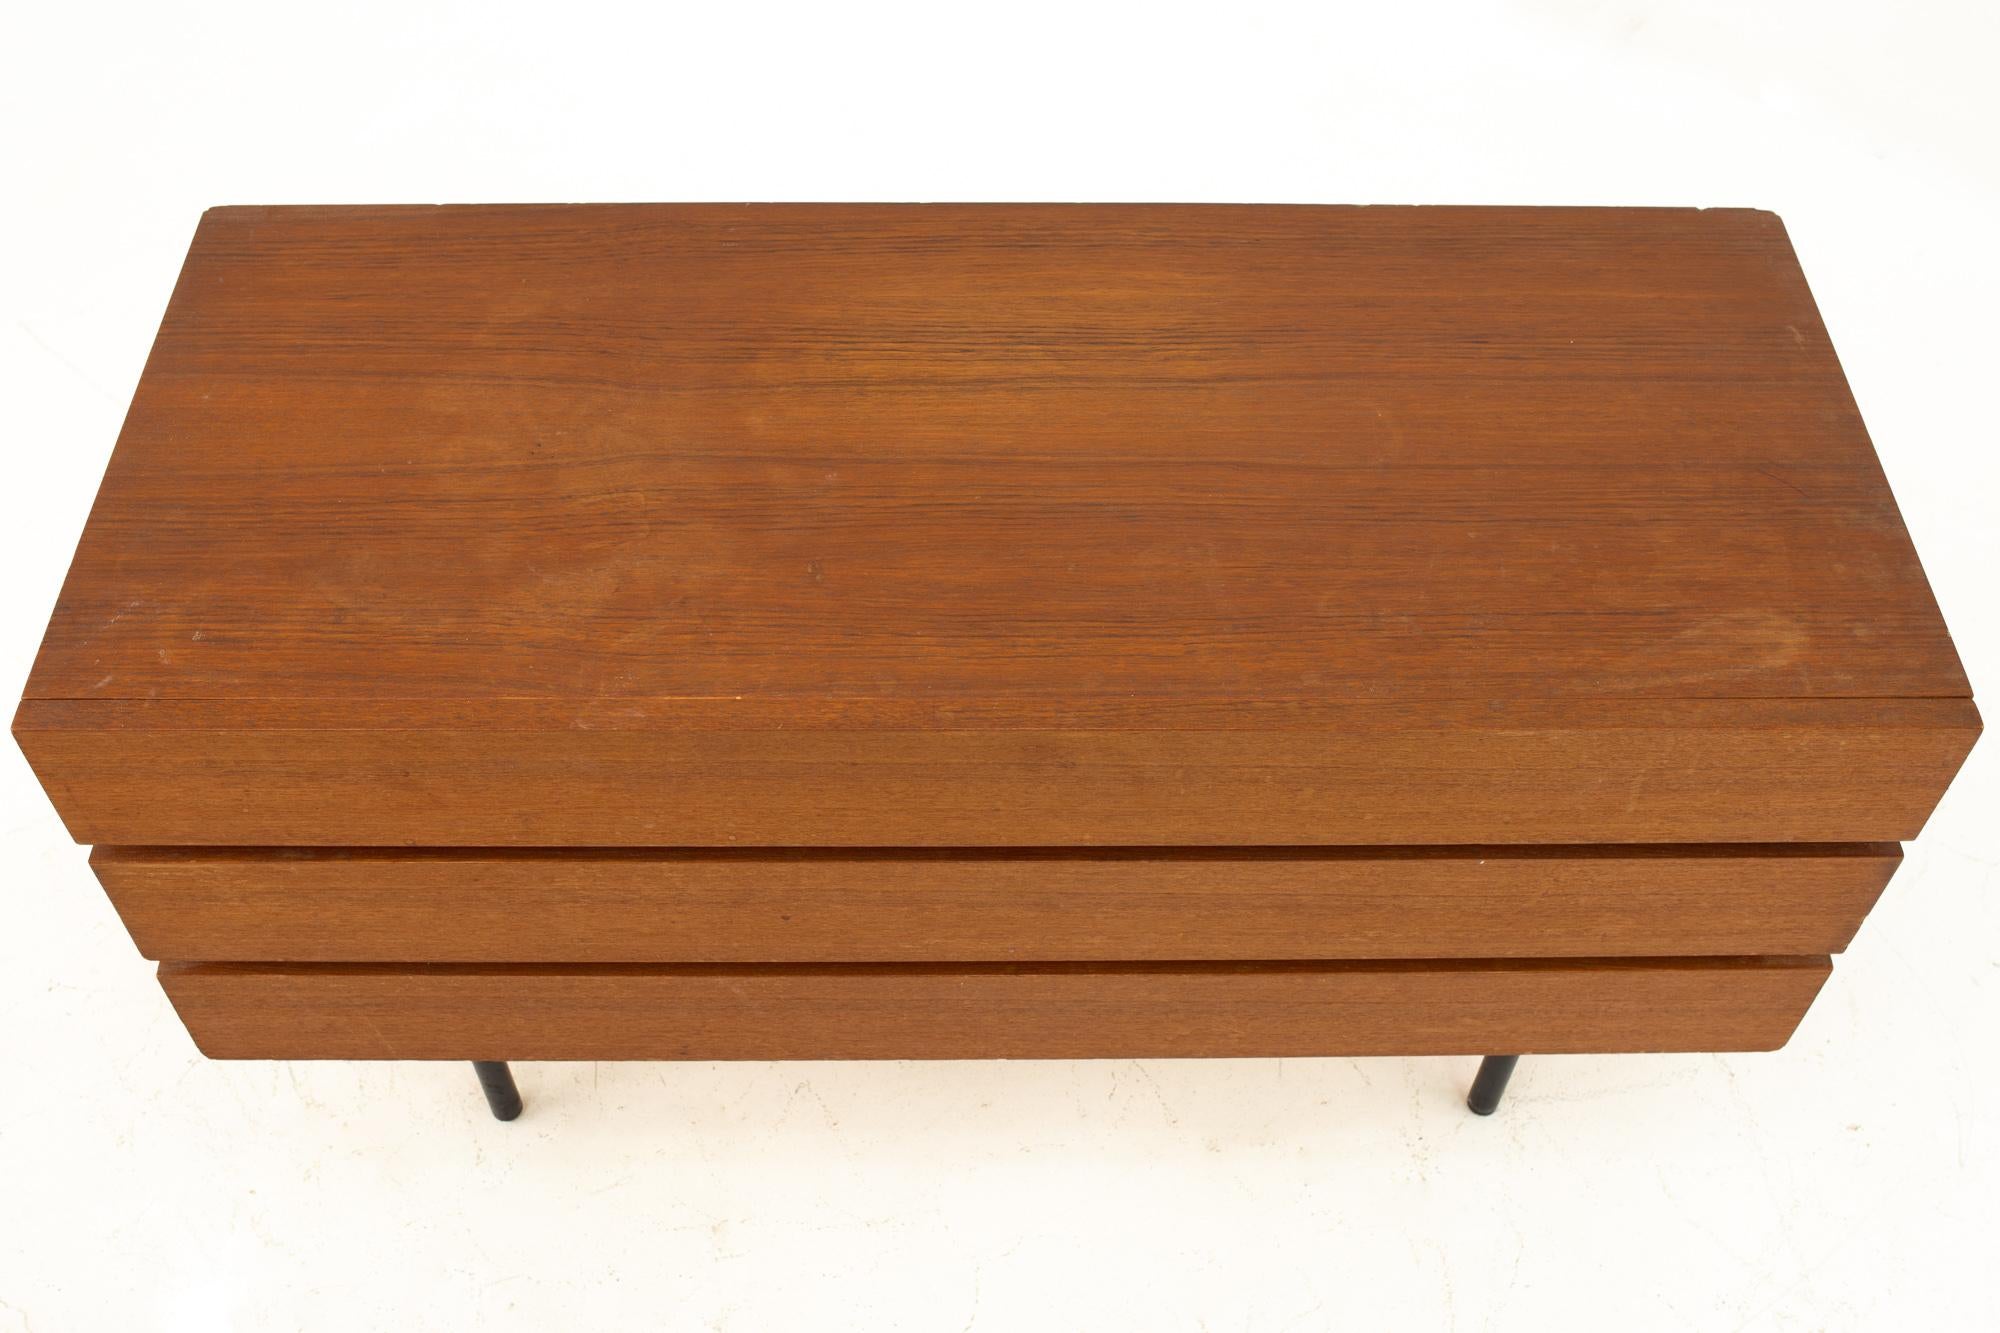 Danish Teak Mid Century 3 Drawer Dresser

Dresser measures: 39.5 wide x 16.5 deep x 20.5 high

This price includes getting this piece in what we call Restored Vintage Condition. That means the piece is permanently fixed upon purchase so it’s